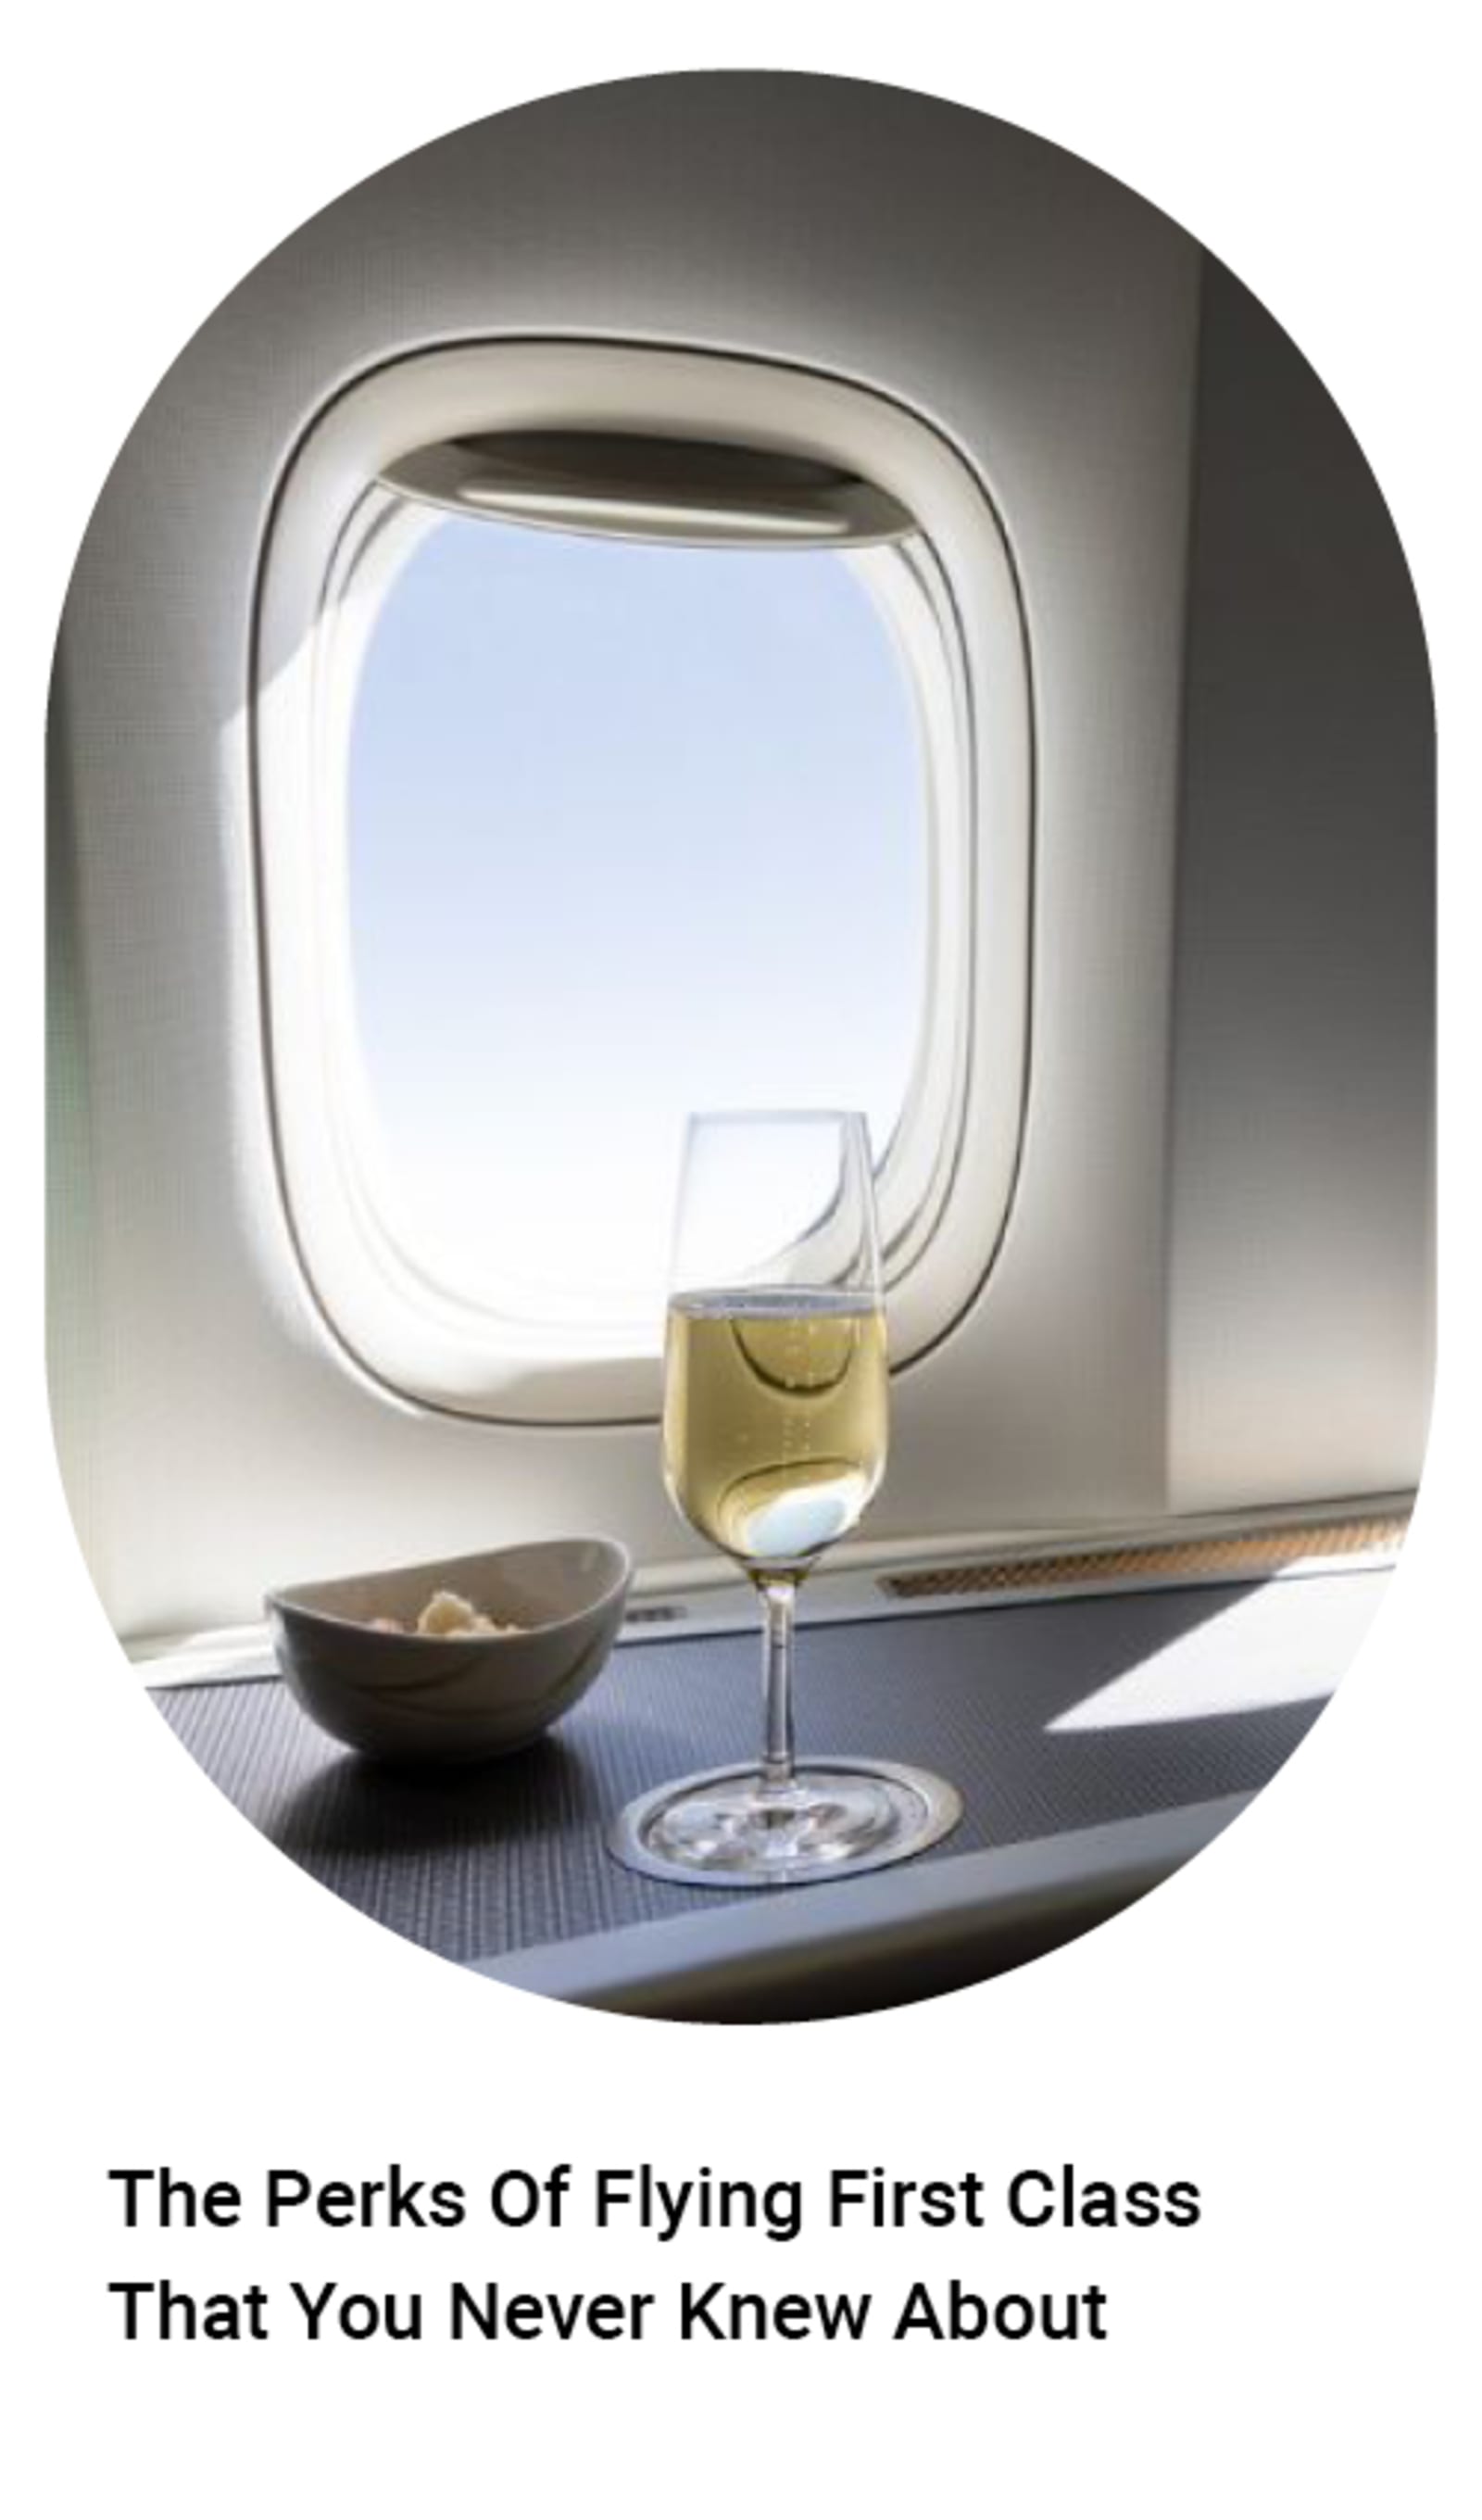 Wine and a bowl in front of an airplane window - The perks of flying first class that you never knew about